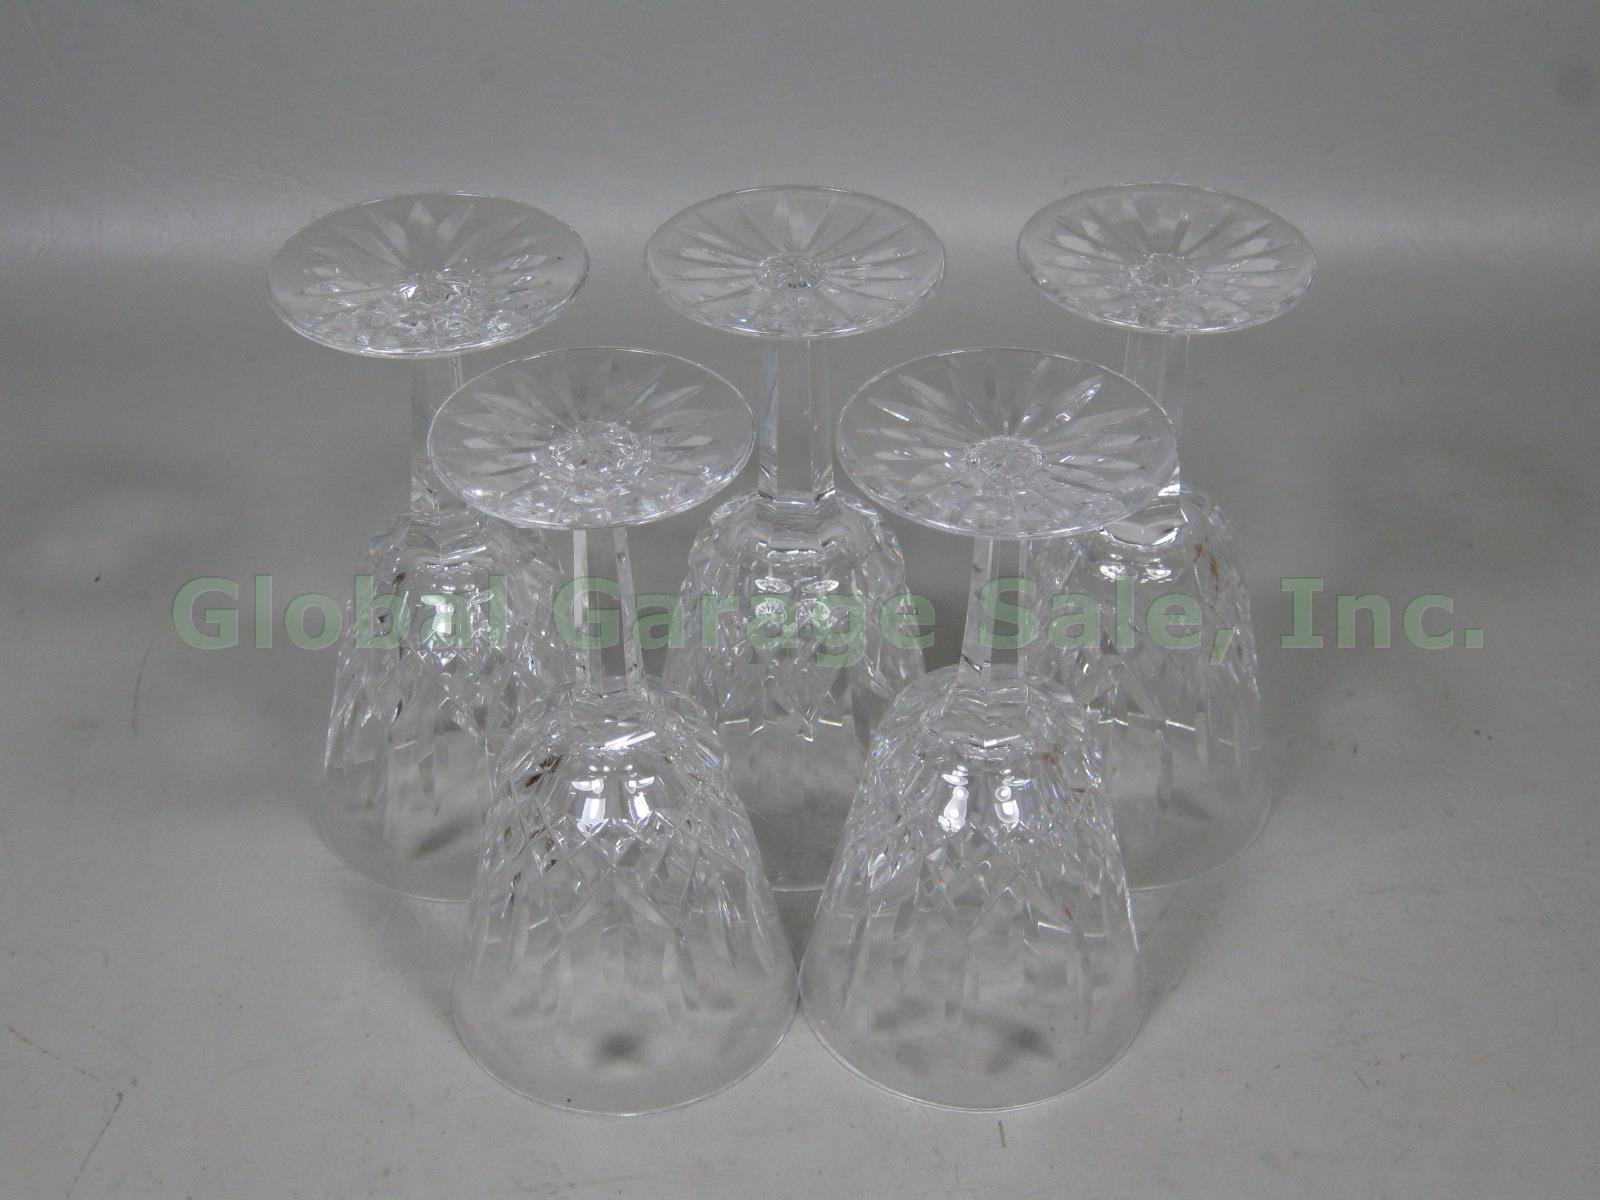 5 Waterford Crystal Lismore Claret Wine Glasses 5-7/8" Original Owner Bought New 2